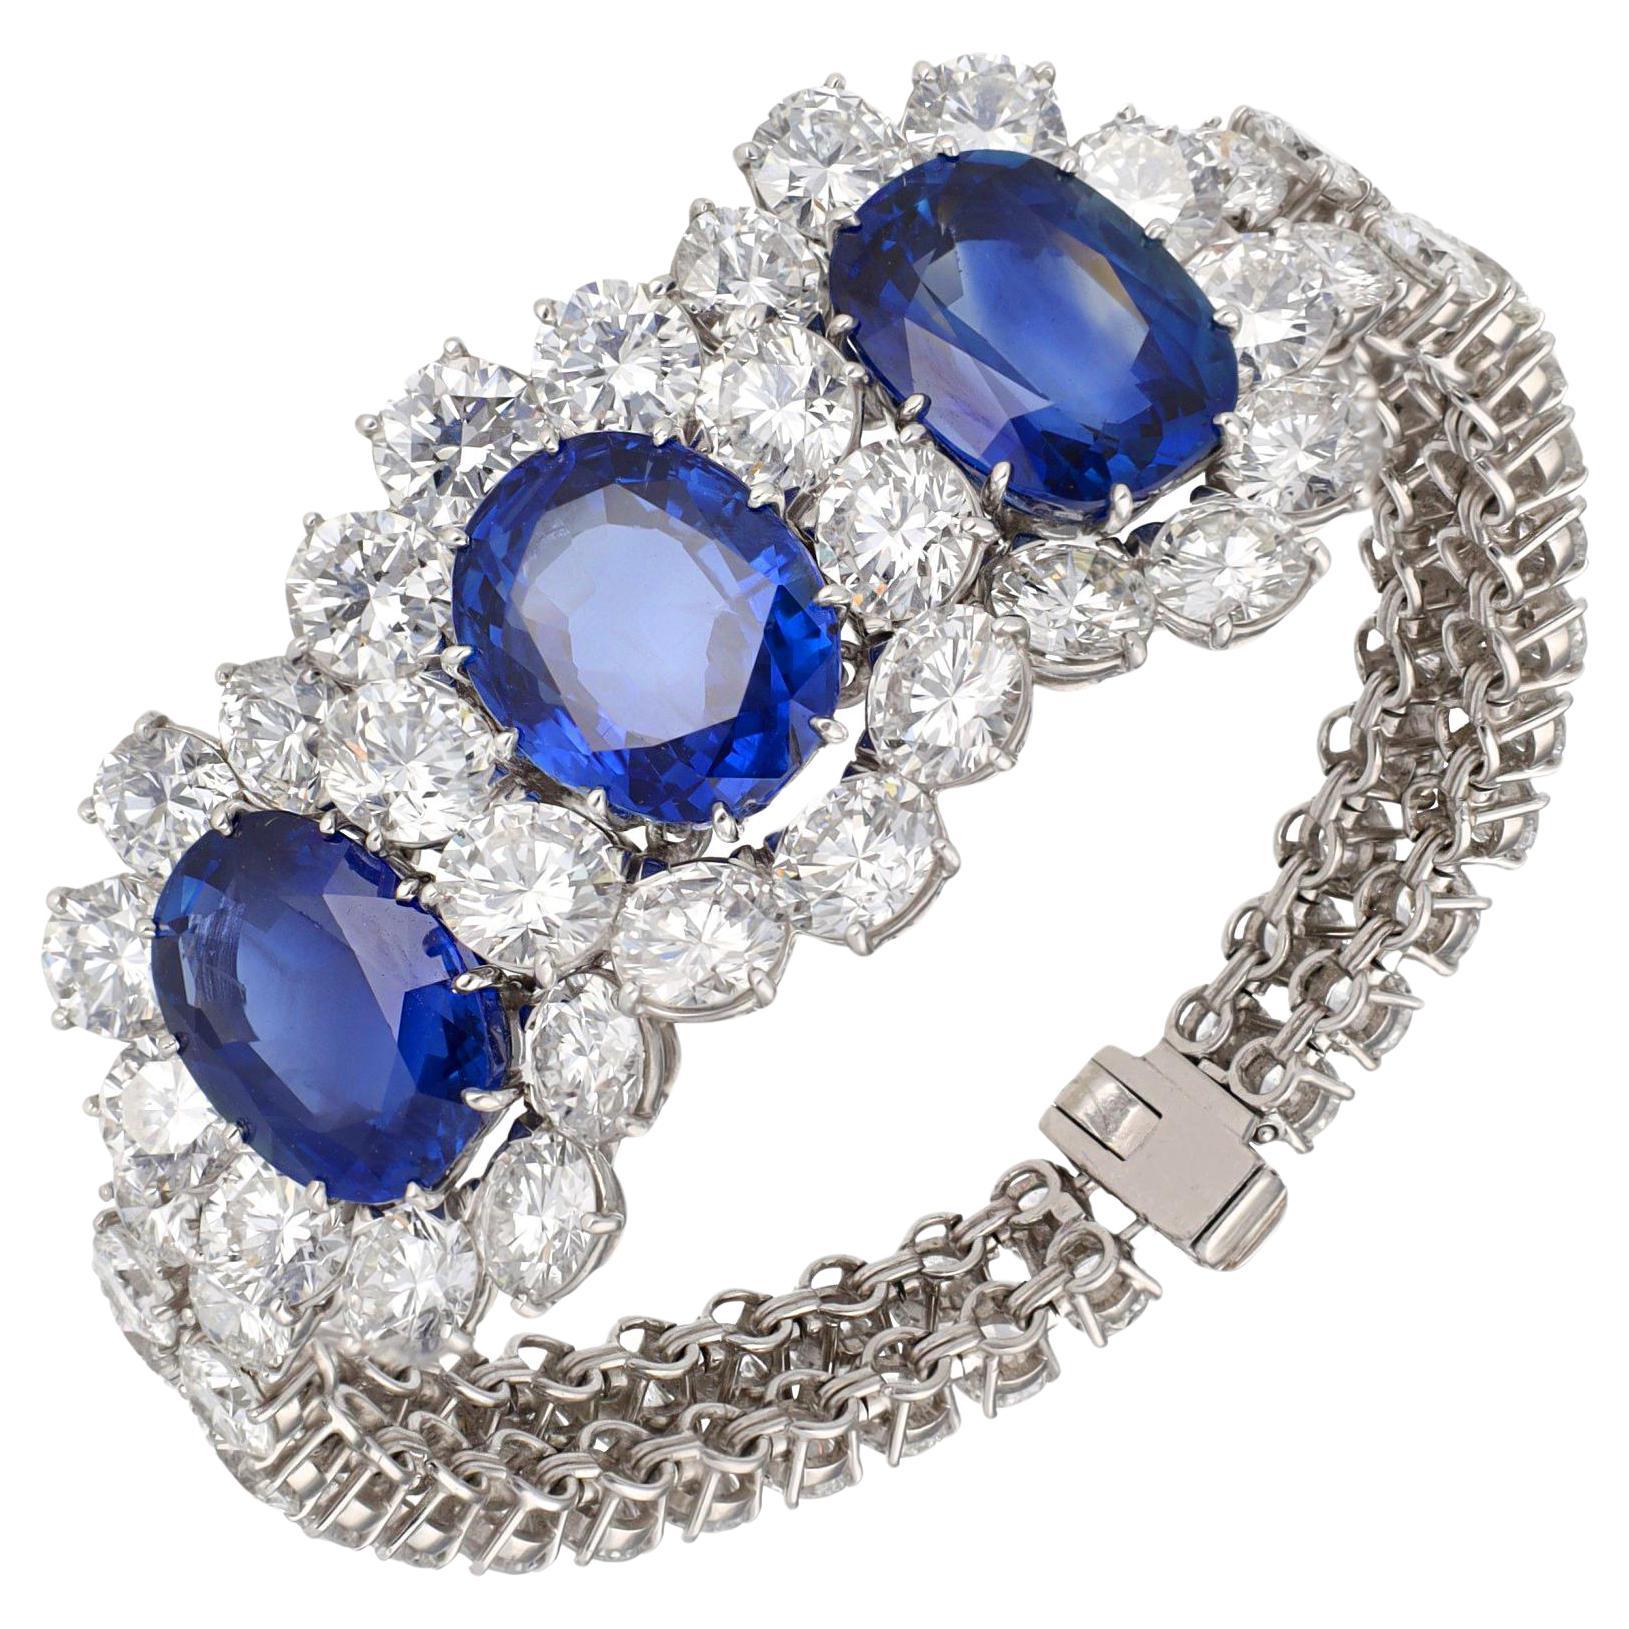 Van Cleef & Arpels 3-Oval Shaped Sapphires and Diamond Bracelet For Sale